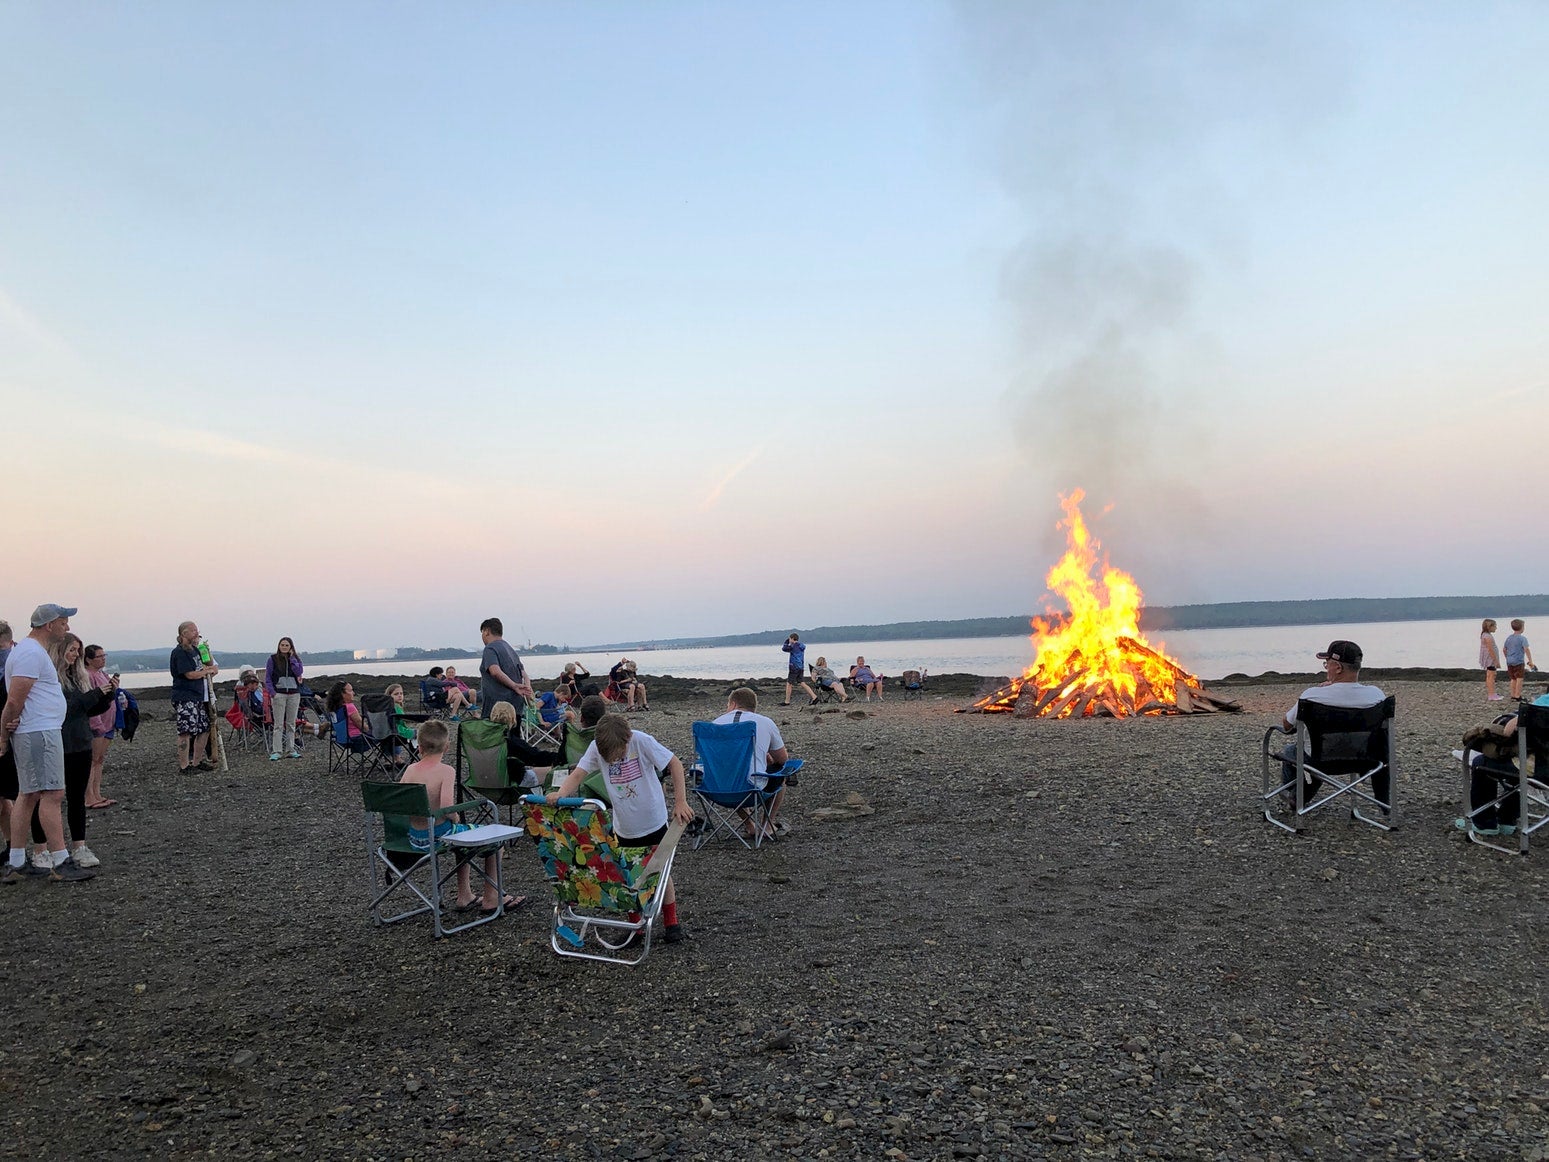 Beach bonfire surrounded by campers in beach chairs.